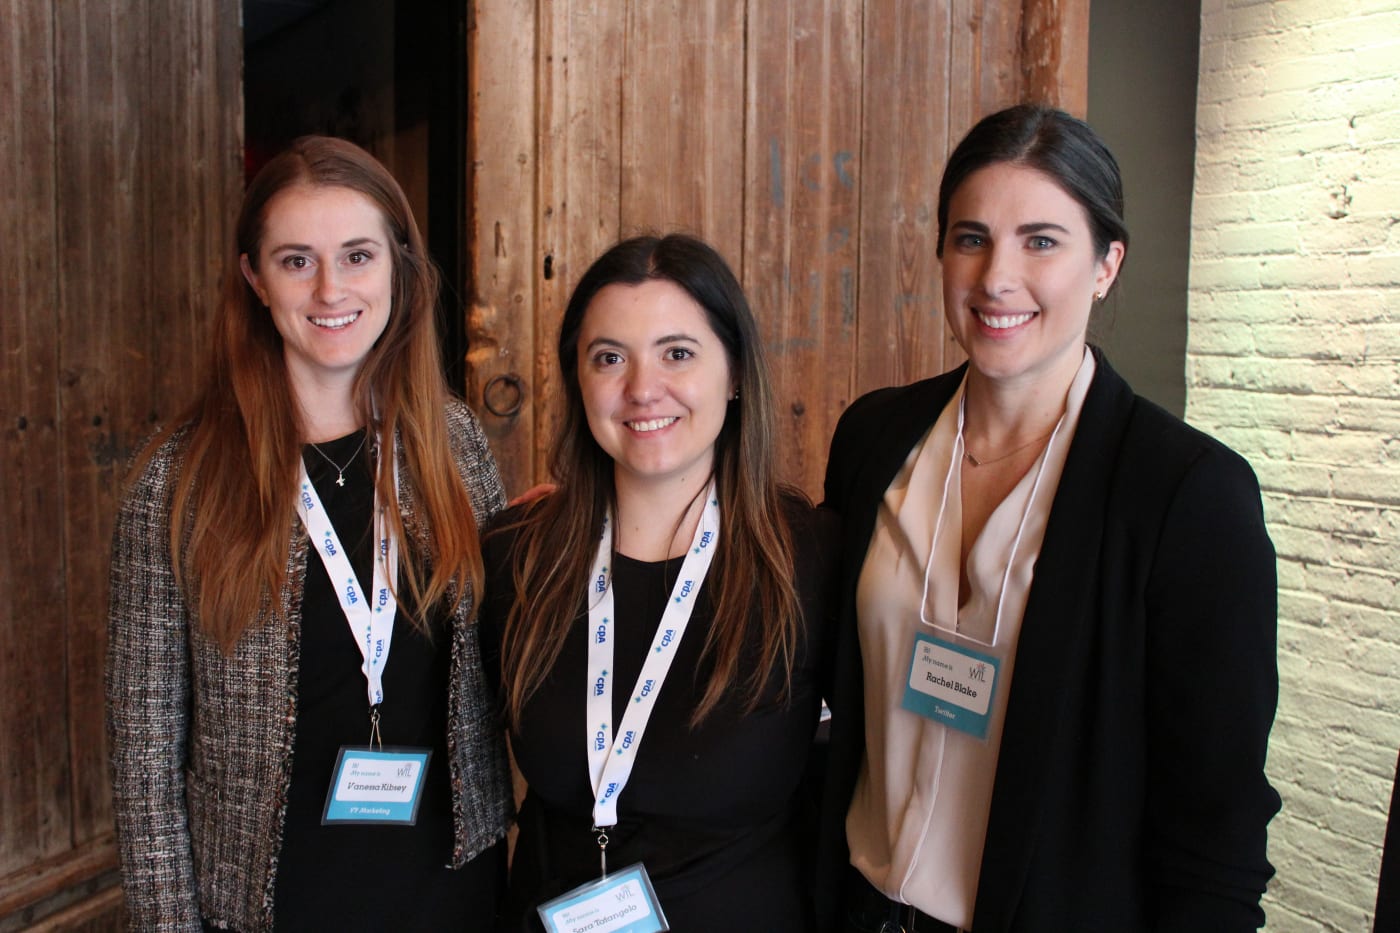 From left to right: Vanessa Kibsey, WIL’s Vice-President of Marketing, Sara Tatangelo, WIL’s Undergraduate Co-President, and Rachel Blake, Regional Lead, Canada and LATAM, Revenue Strategy and Operations with Twitter.